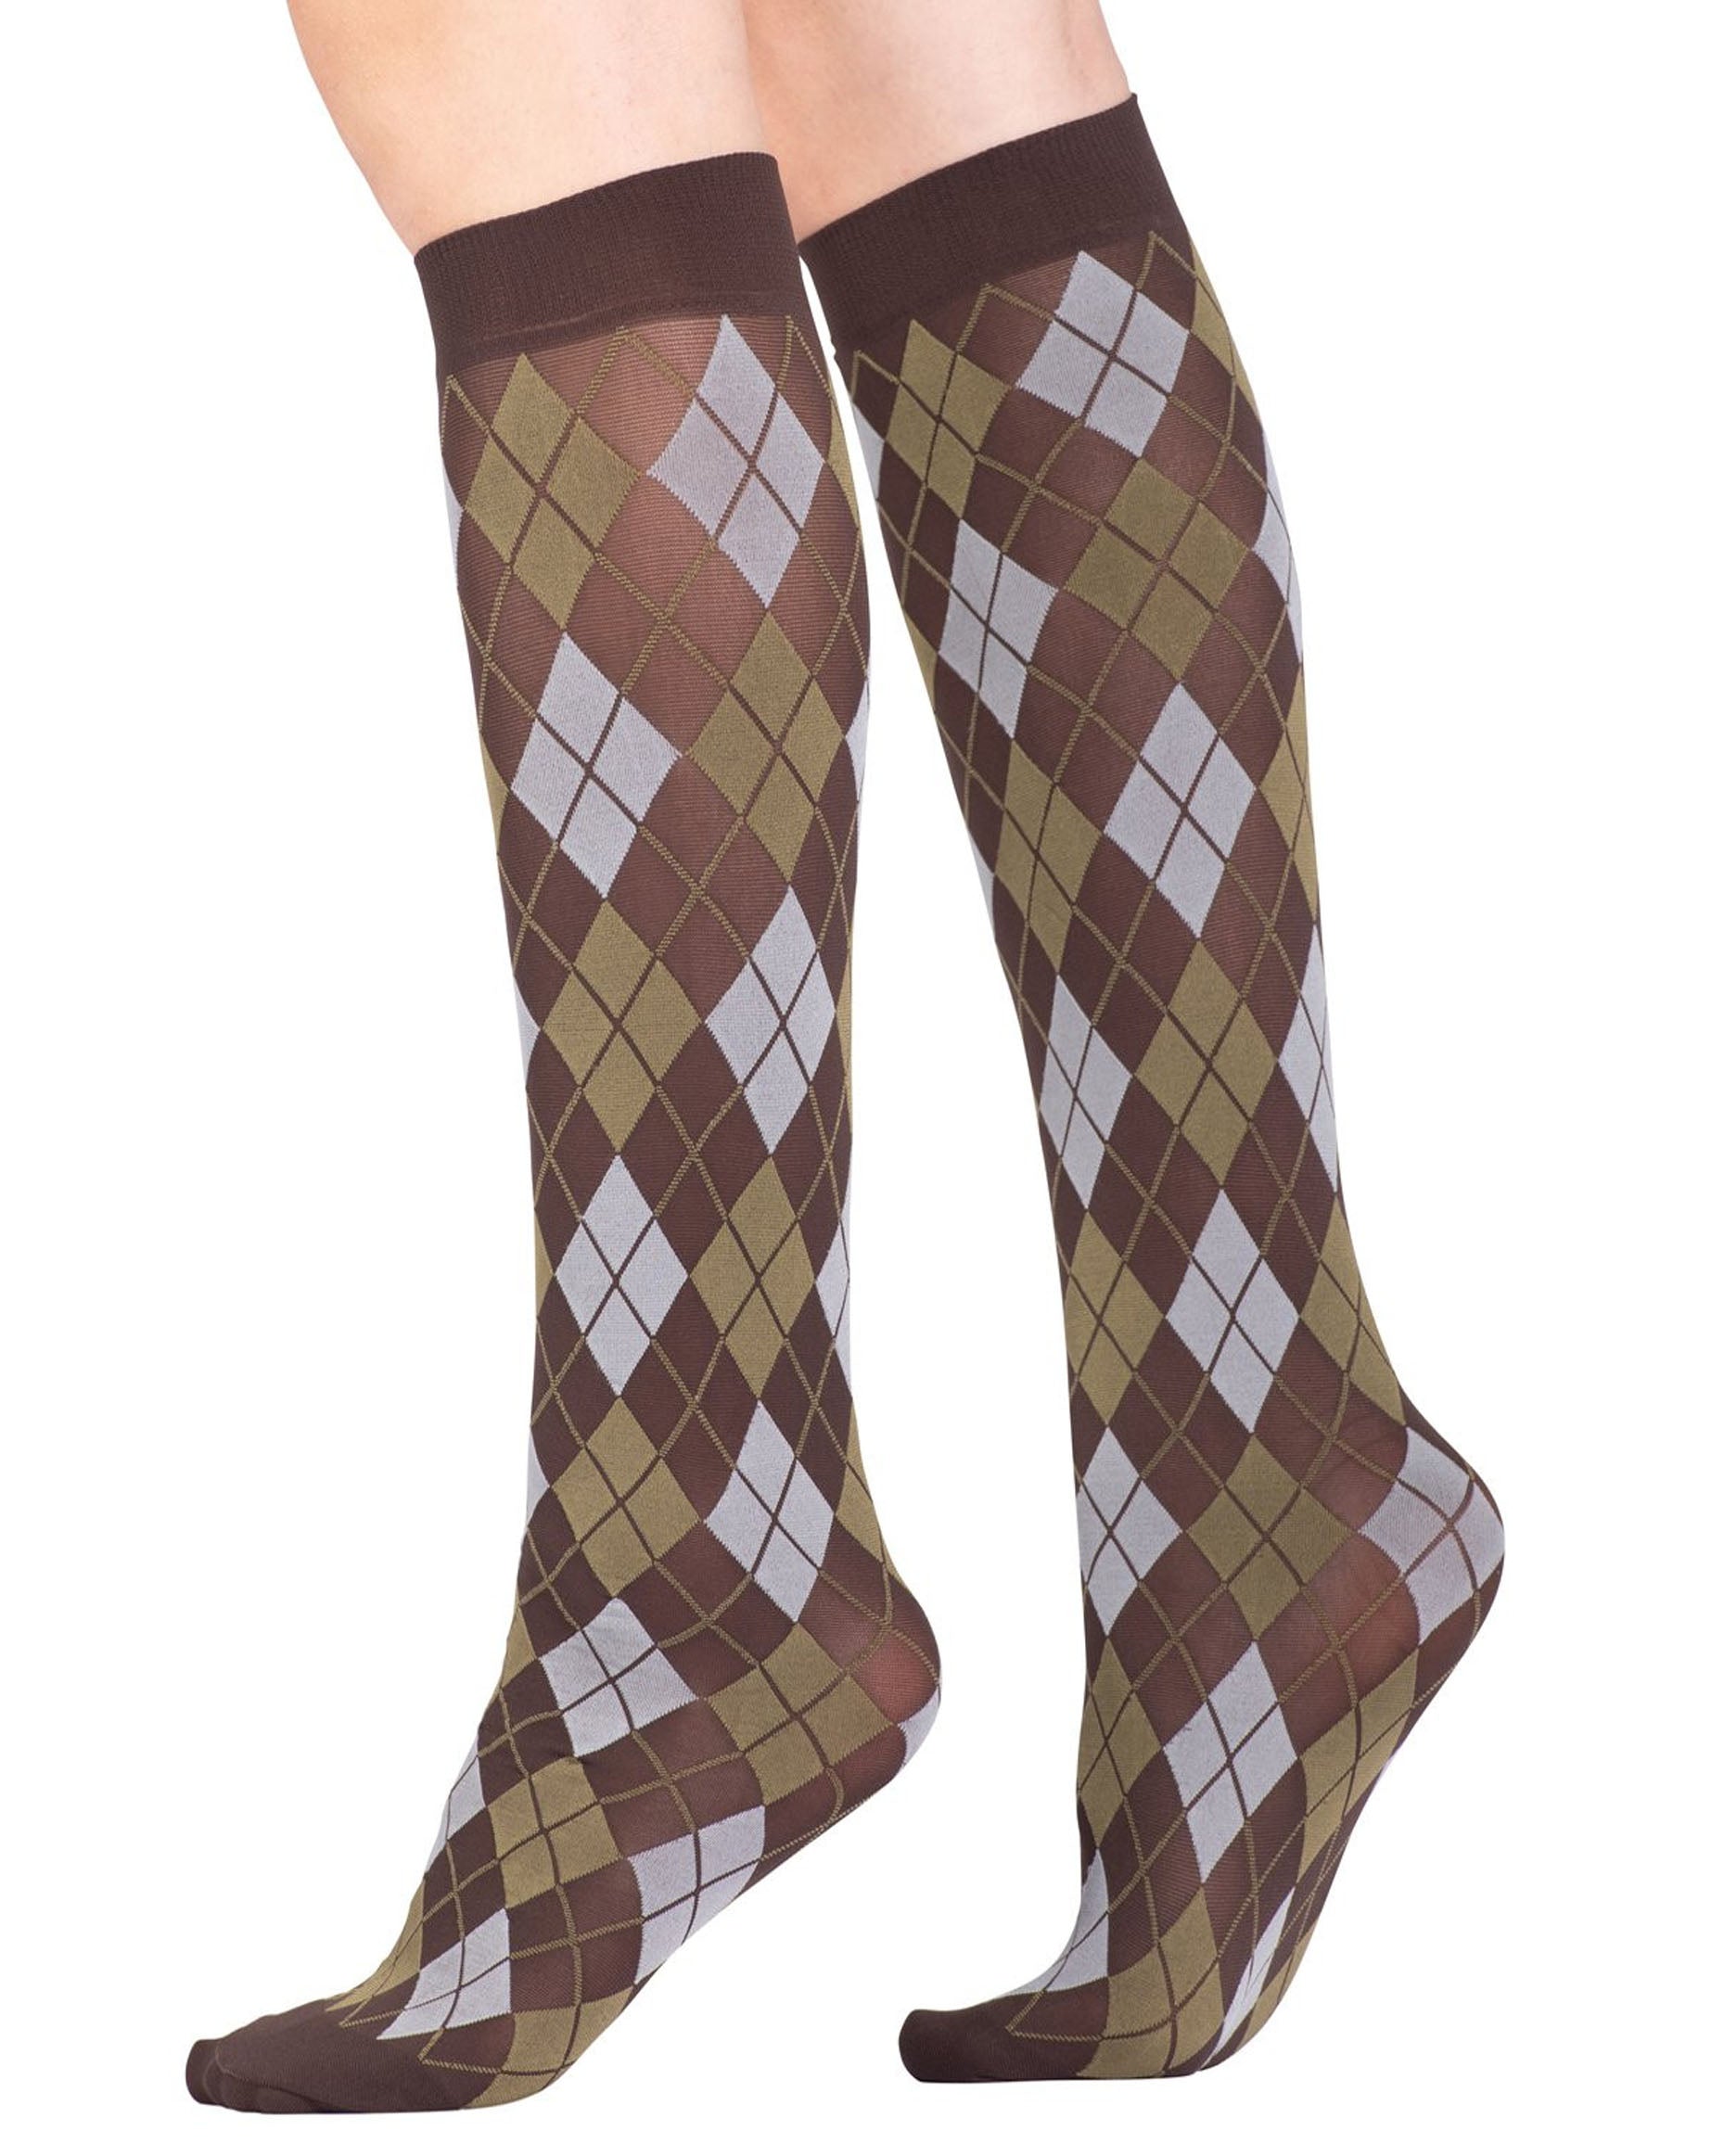 Emilio Cavallini Argyle Socks - Matte brown opaque fashion knee-high socks with a diamond argyle pattern in khaki green and light grey, deep elasticated cuff and reinforced toe.